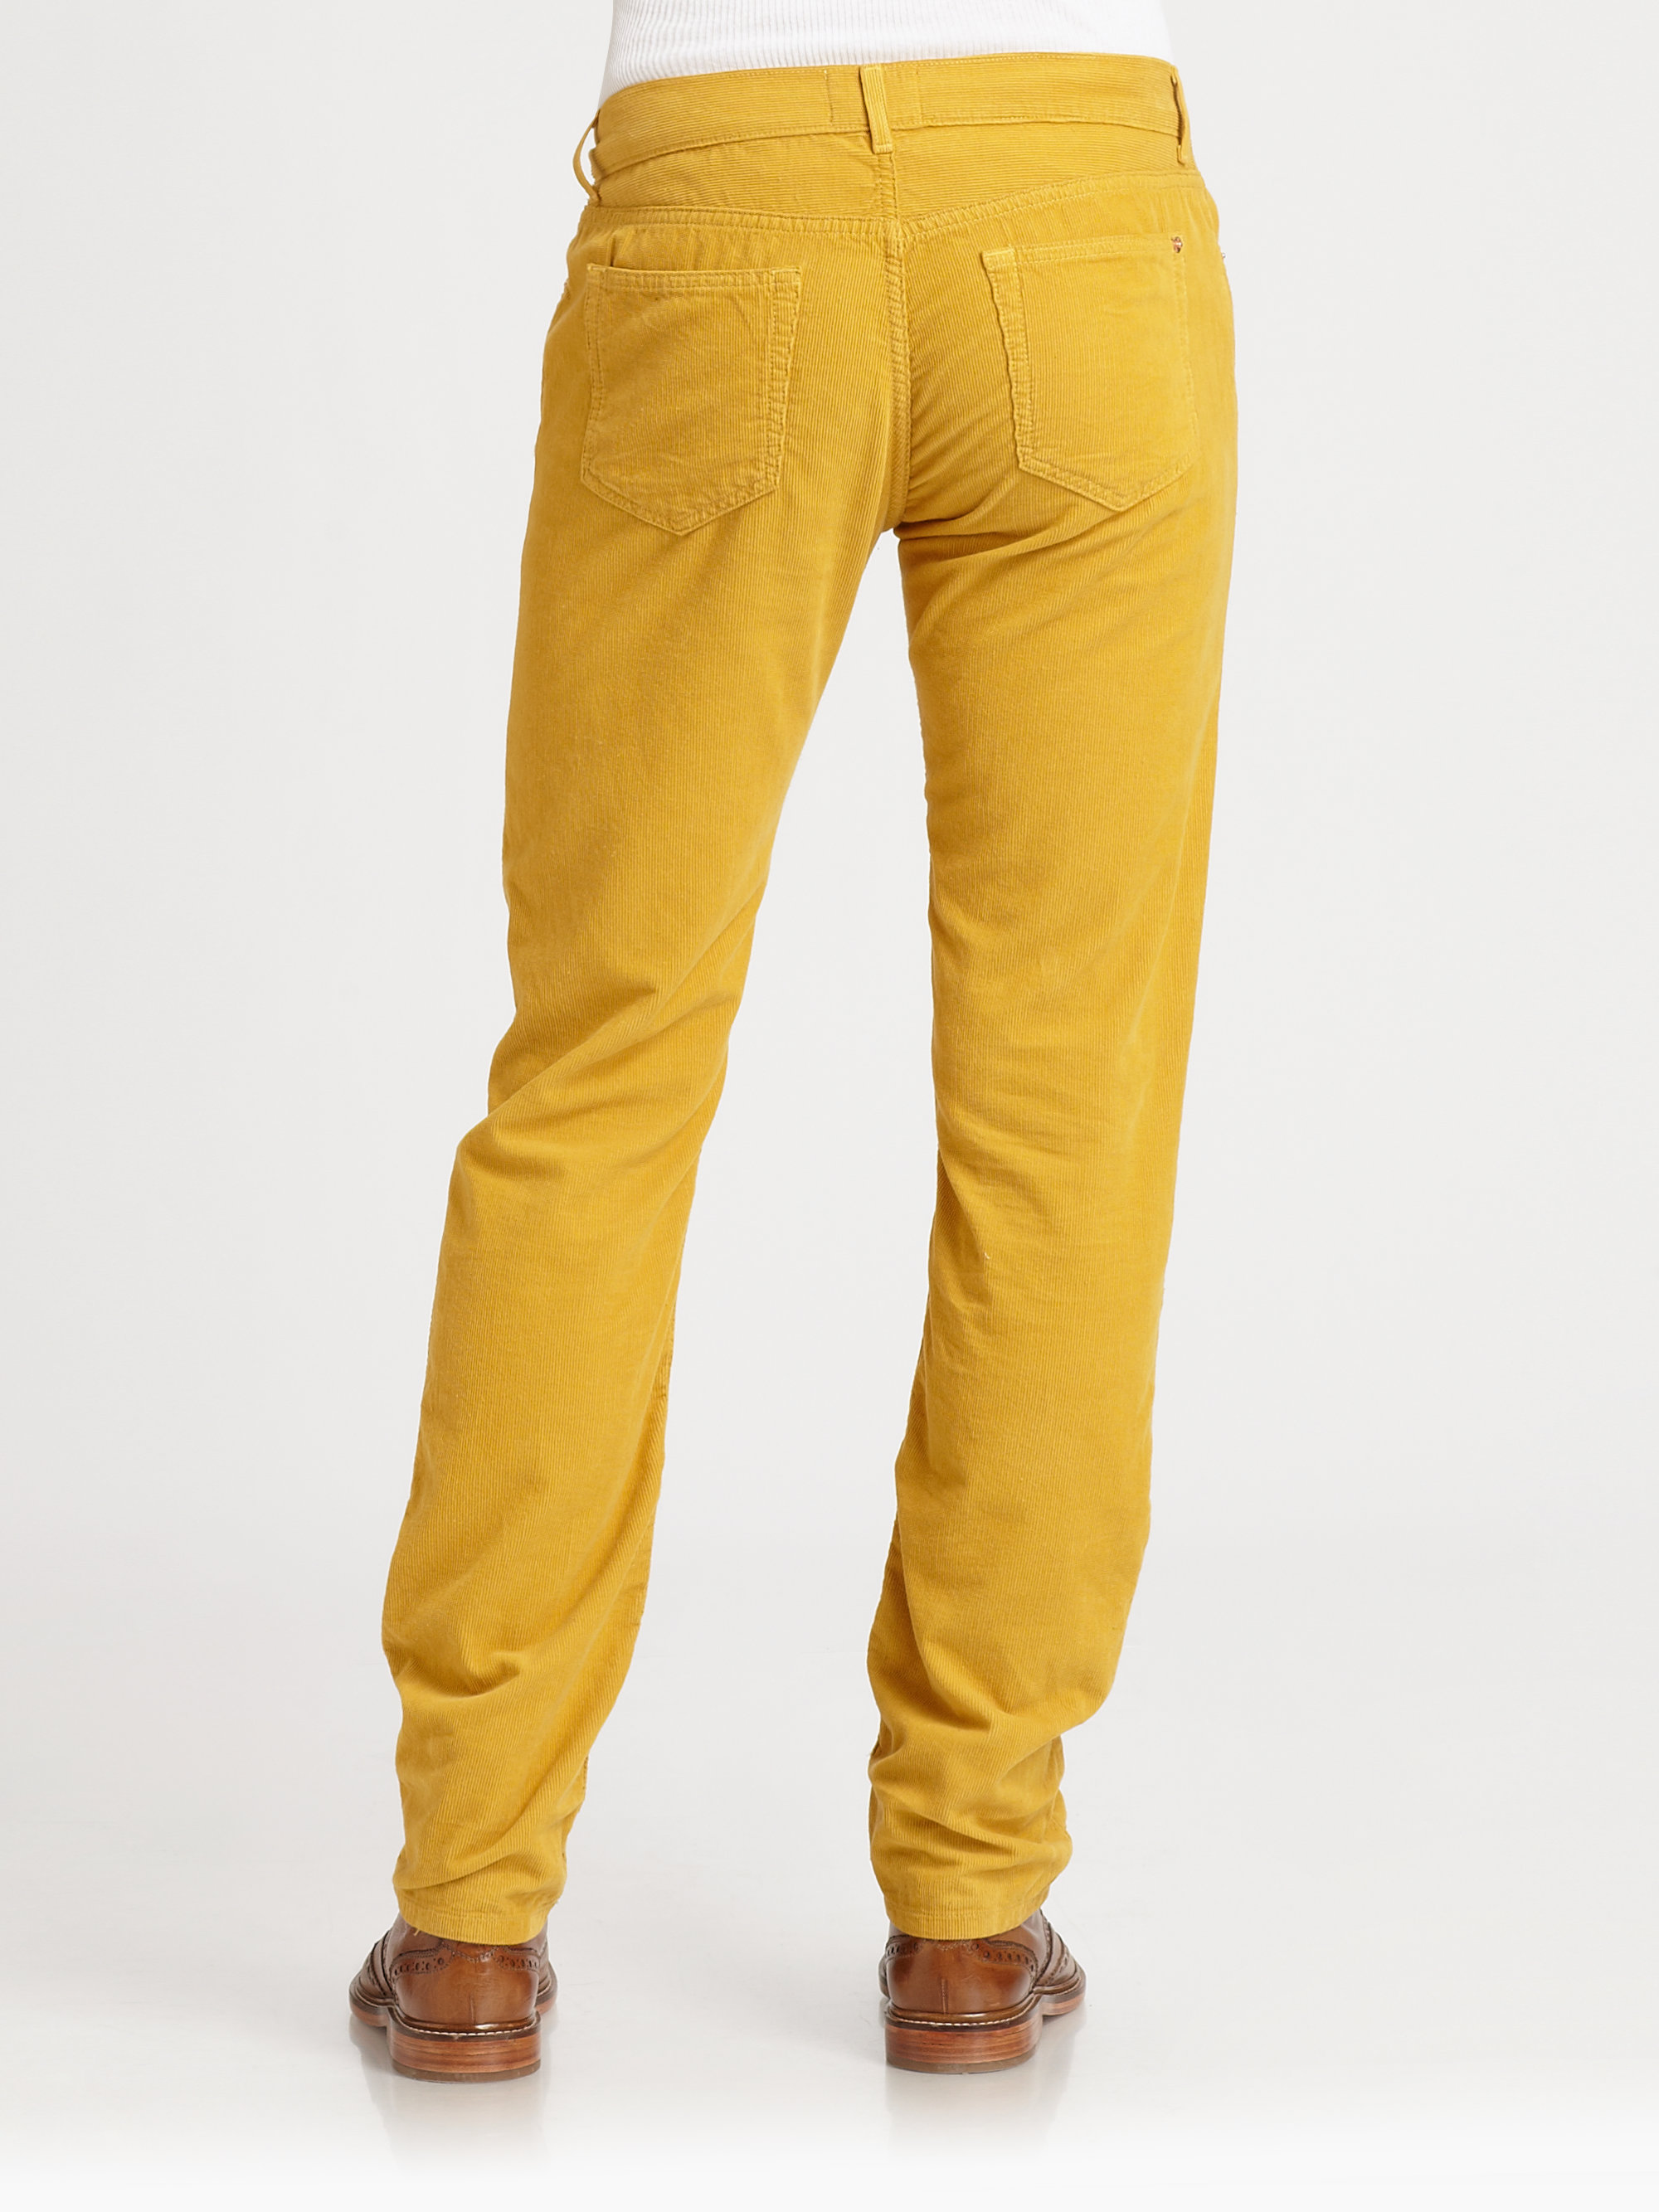 Band of outsiders Corduroy Pants in Yellow for Men | Lyst